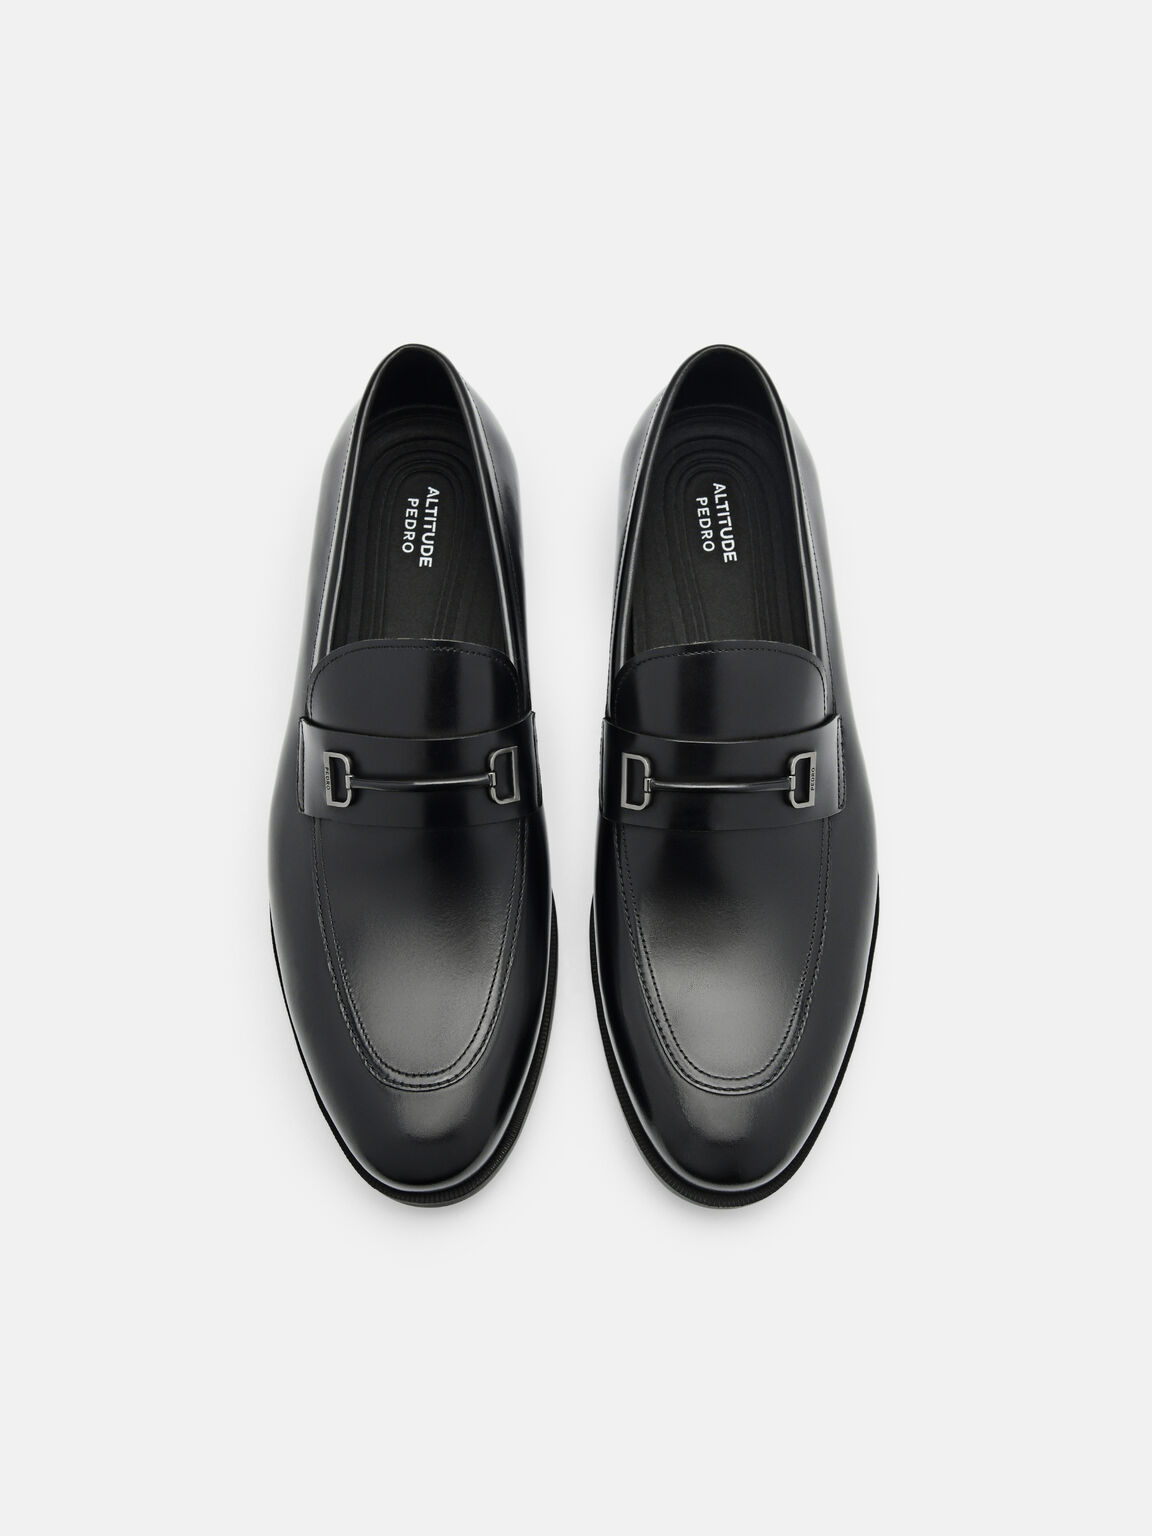 Black Altitude Lightweight Casey Leather Loafers - PEDRO SG